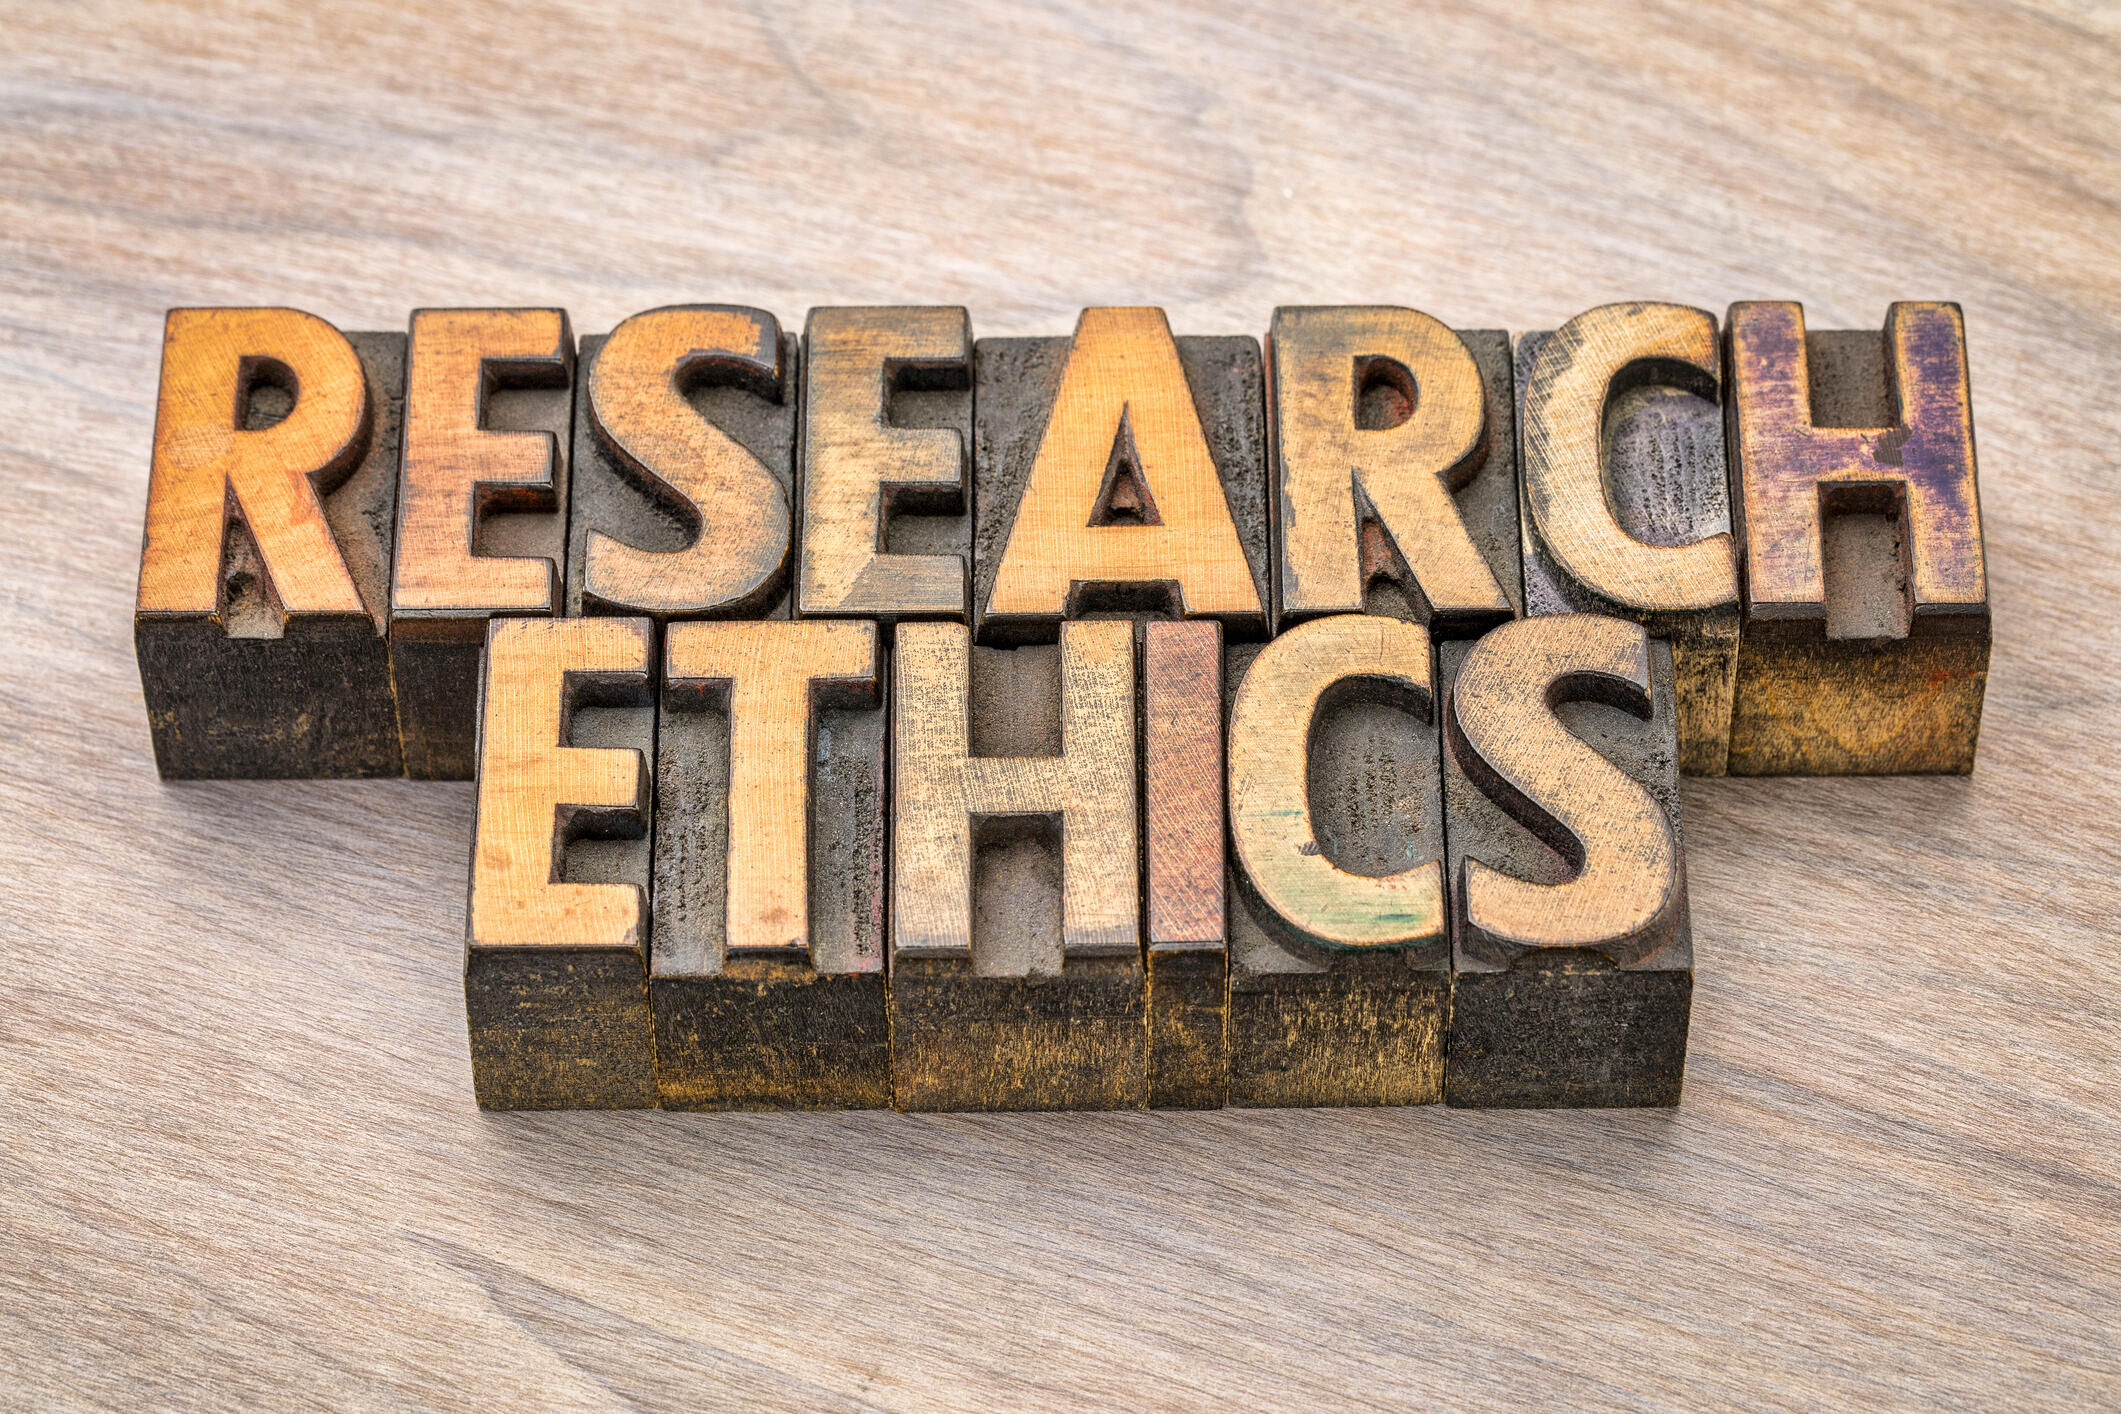 definition of a research ethics committee